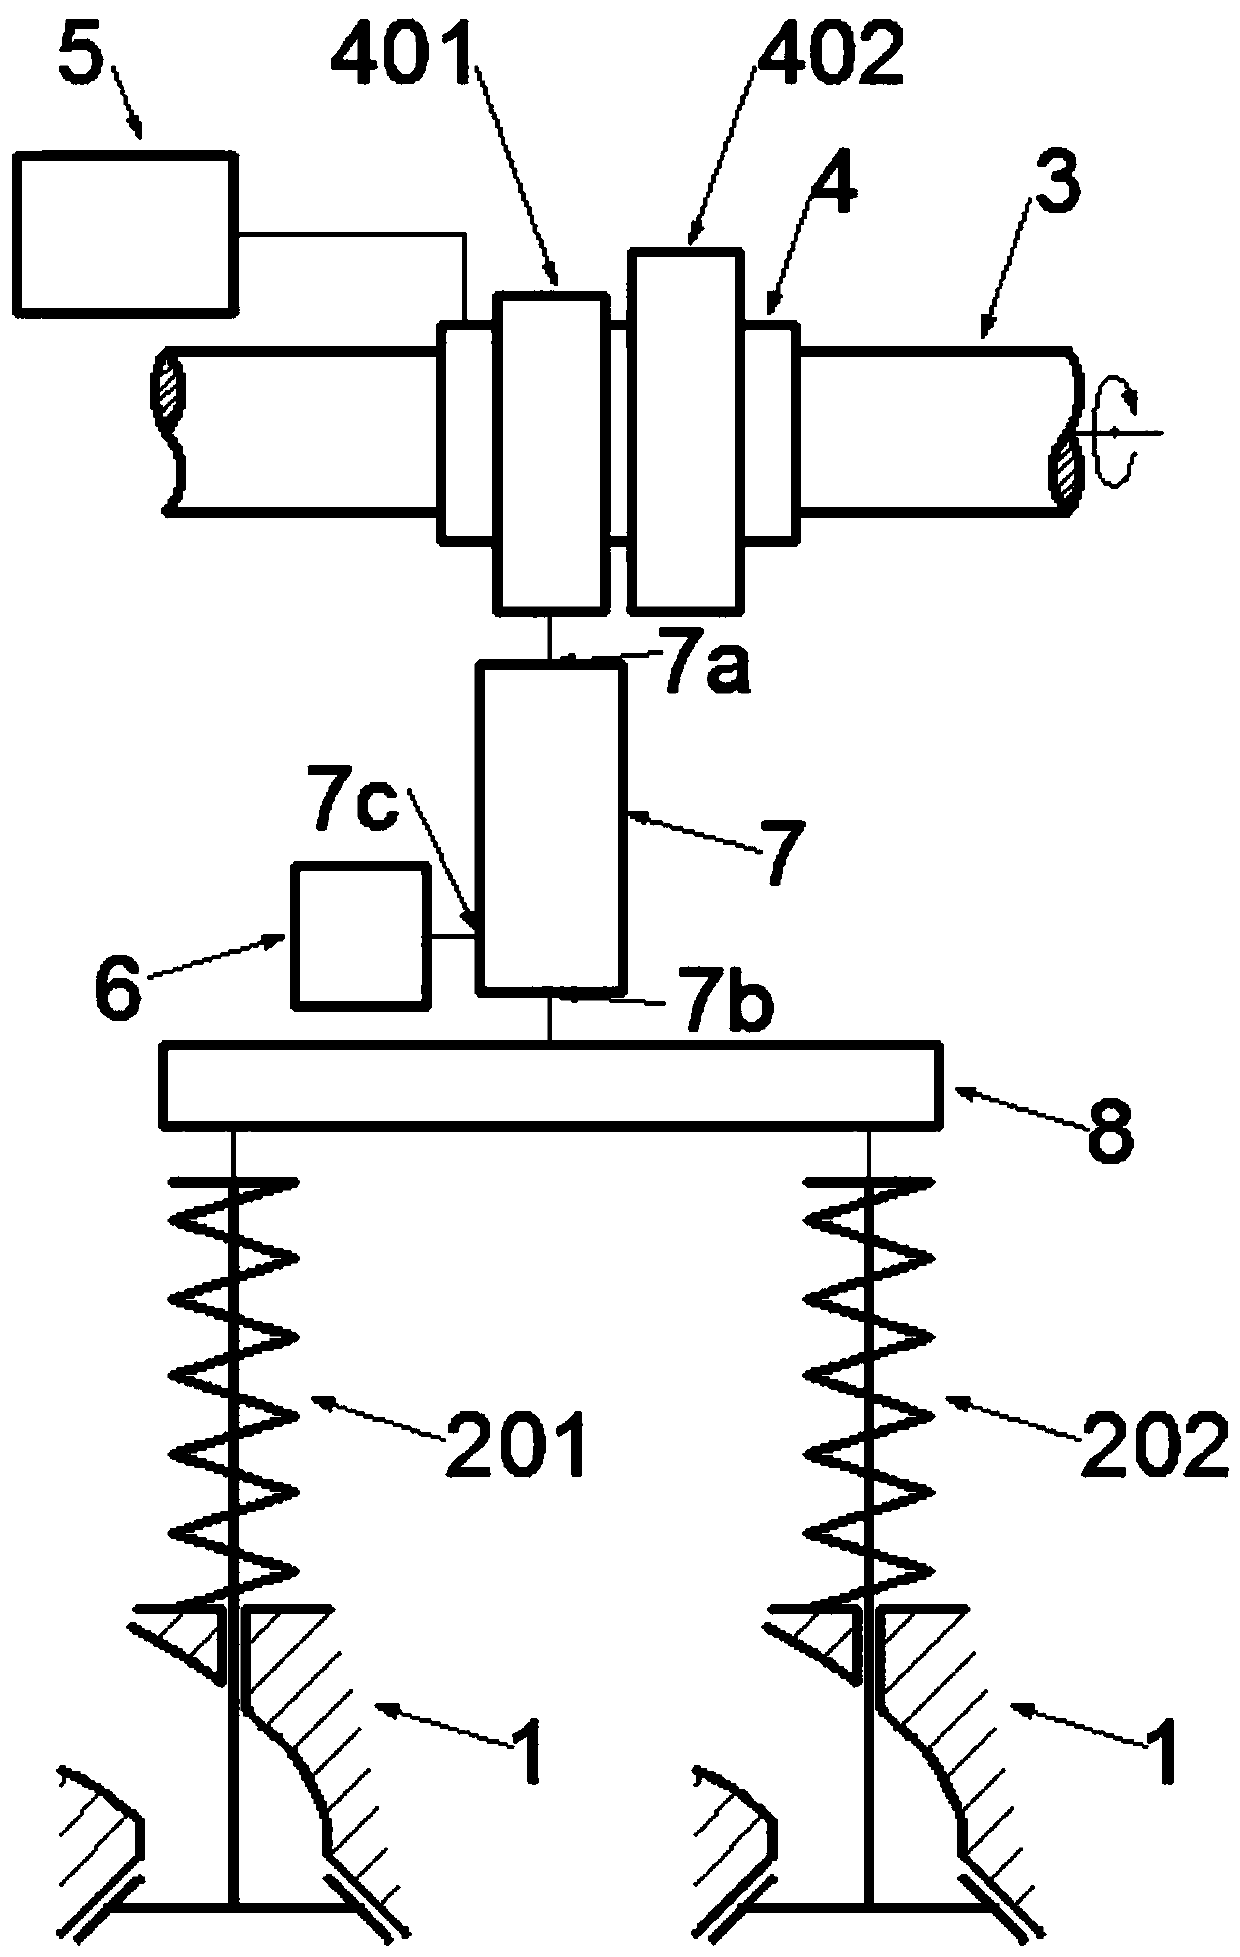 An axially movable multi-mode four-bar variable valve drive system